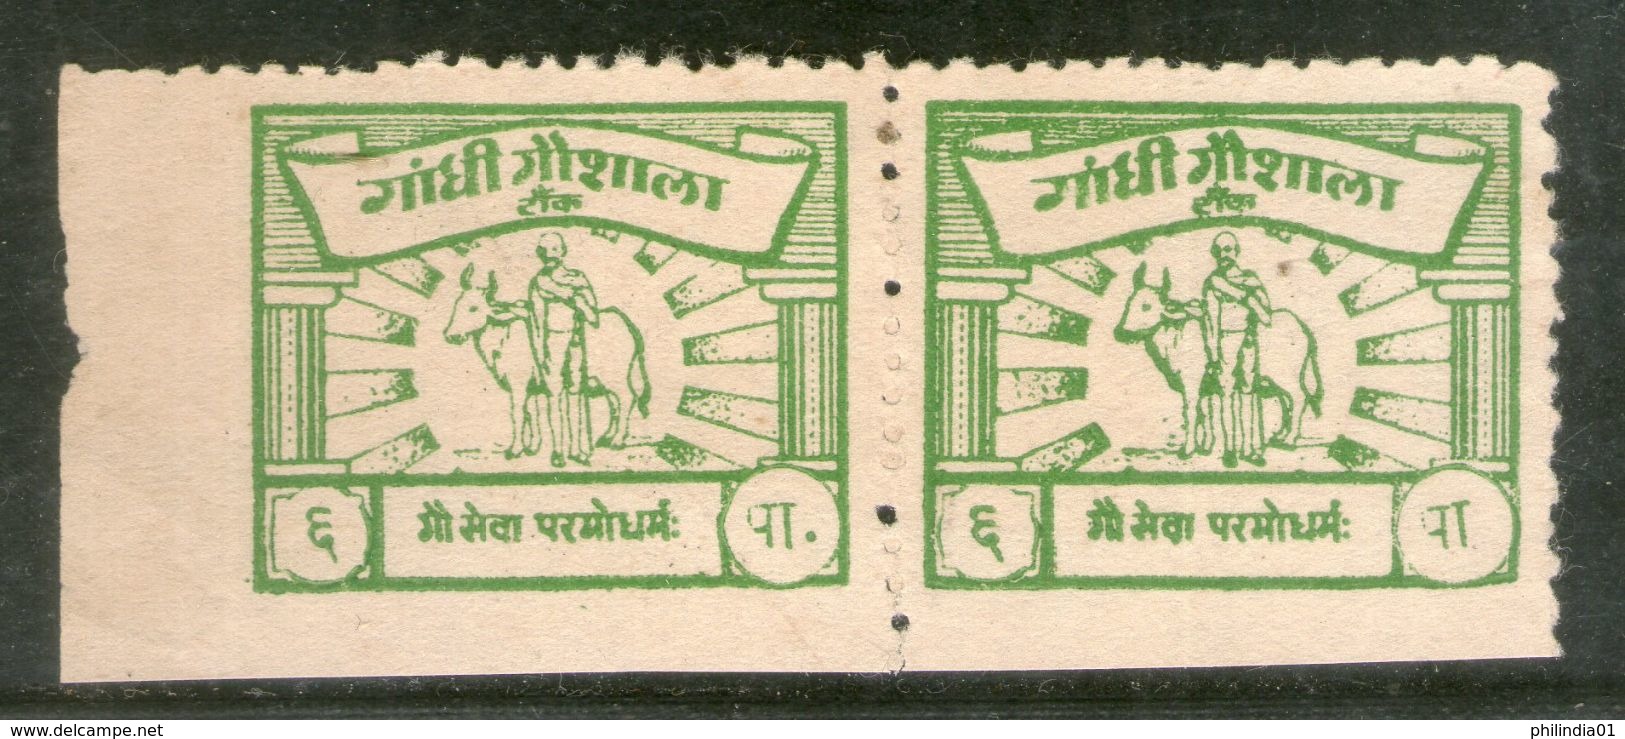 India 6ps Gandhi Gaushala Tonk Charity Label Pair Extremely RARE # 2451 - Charity Stamps